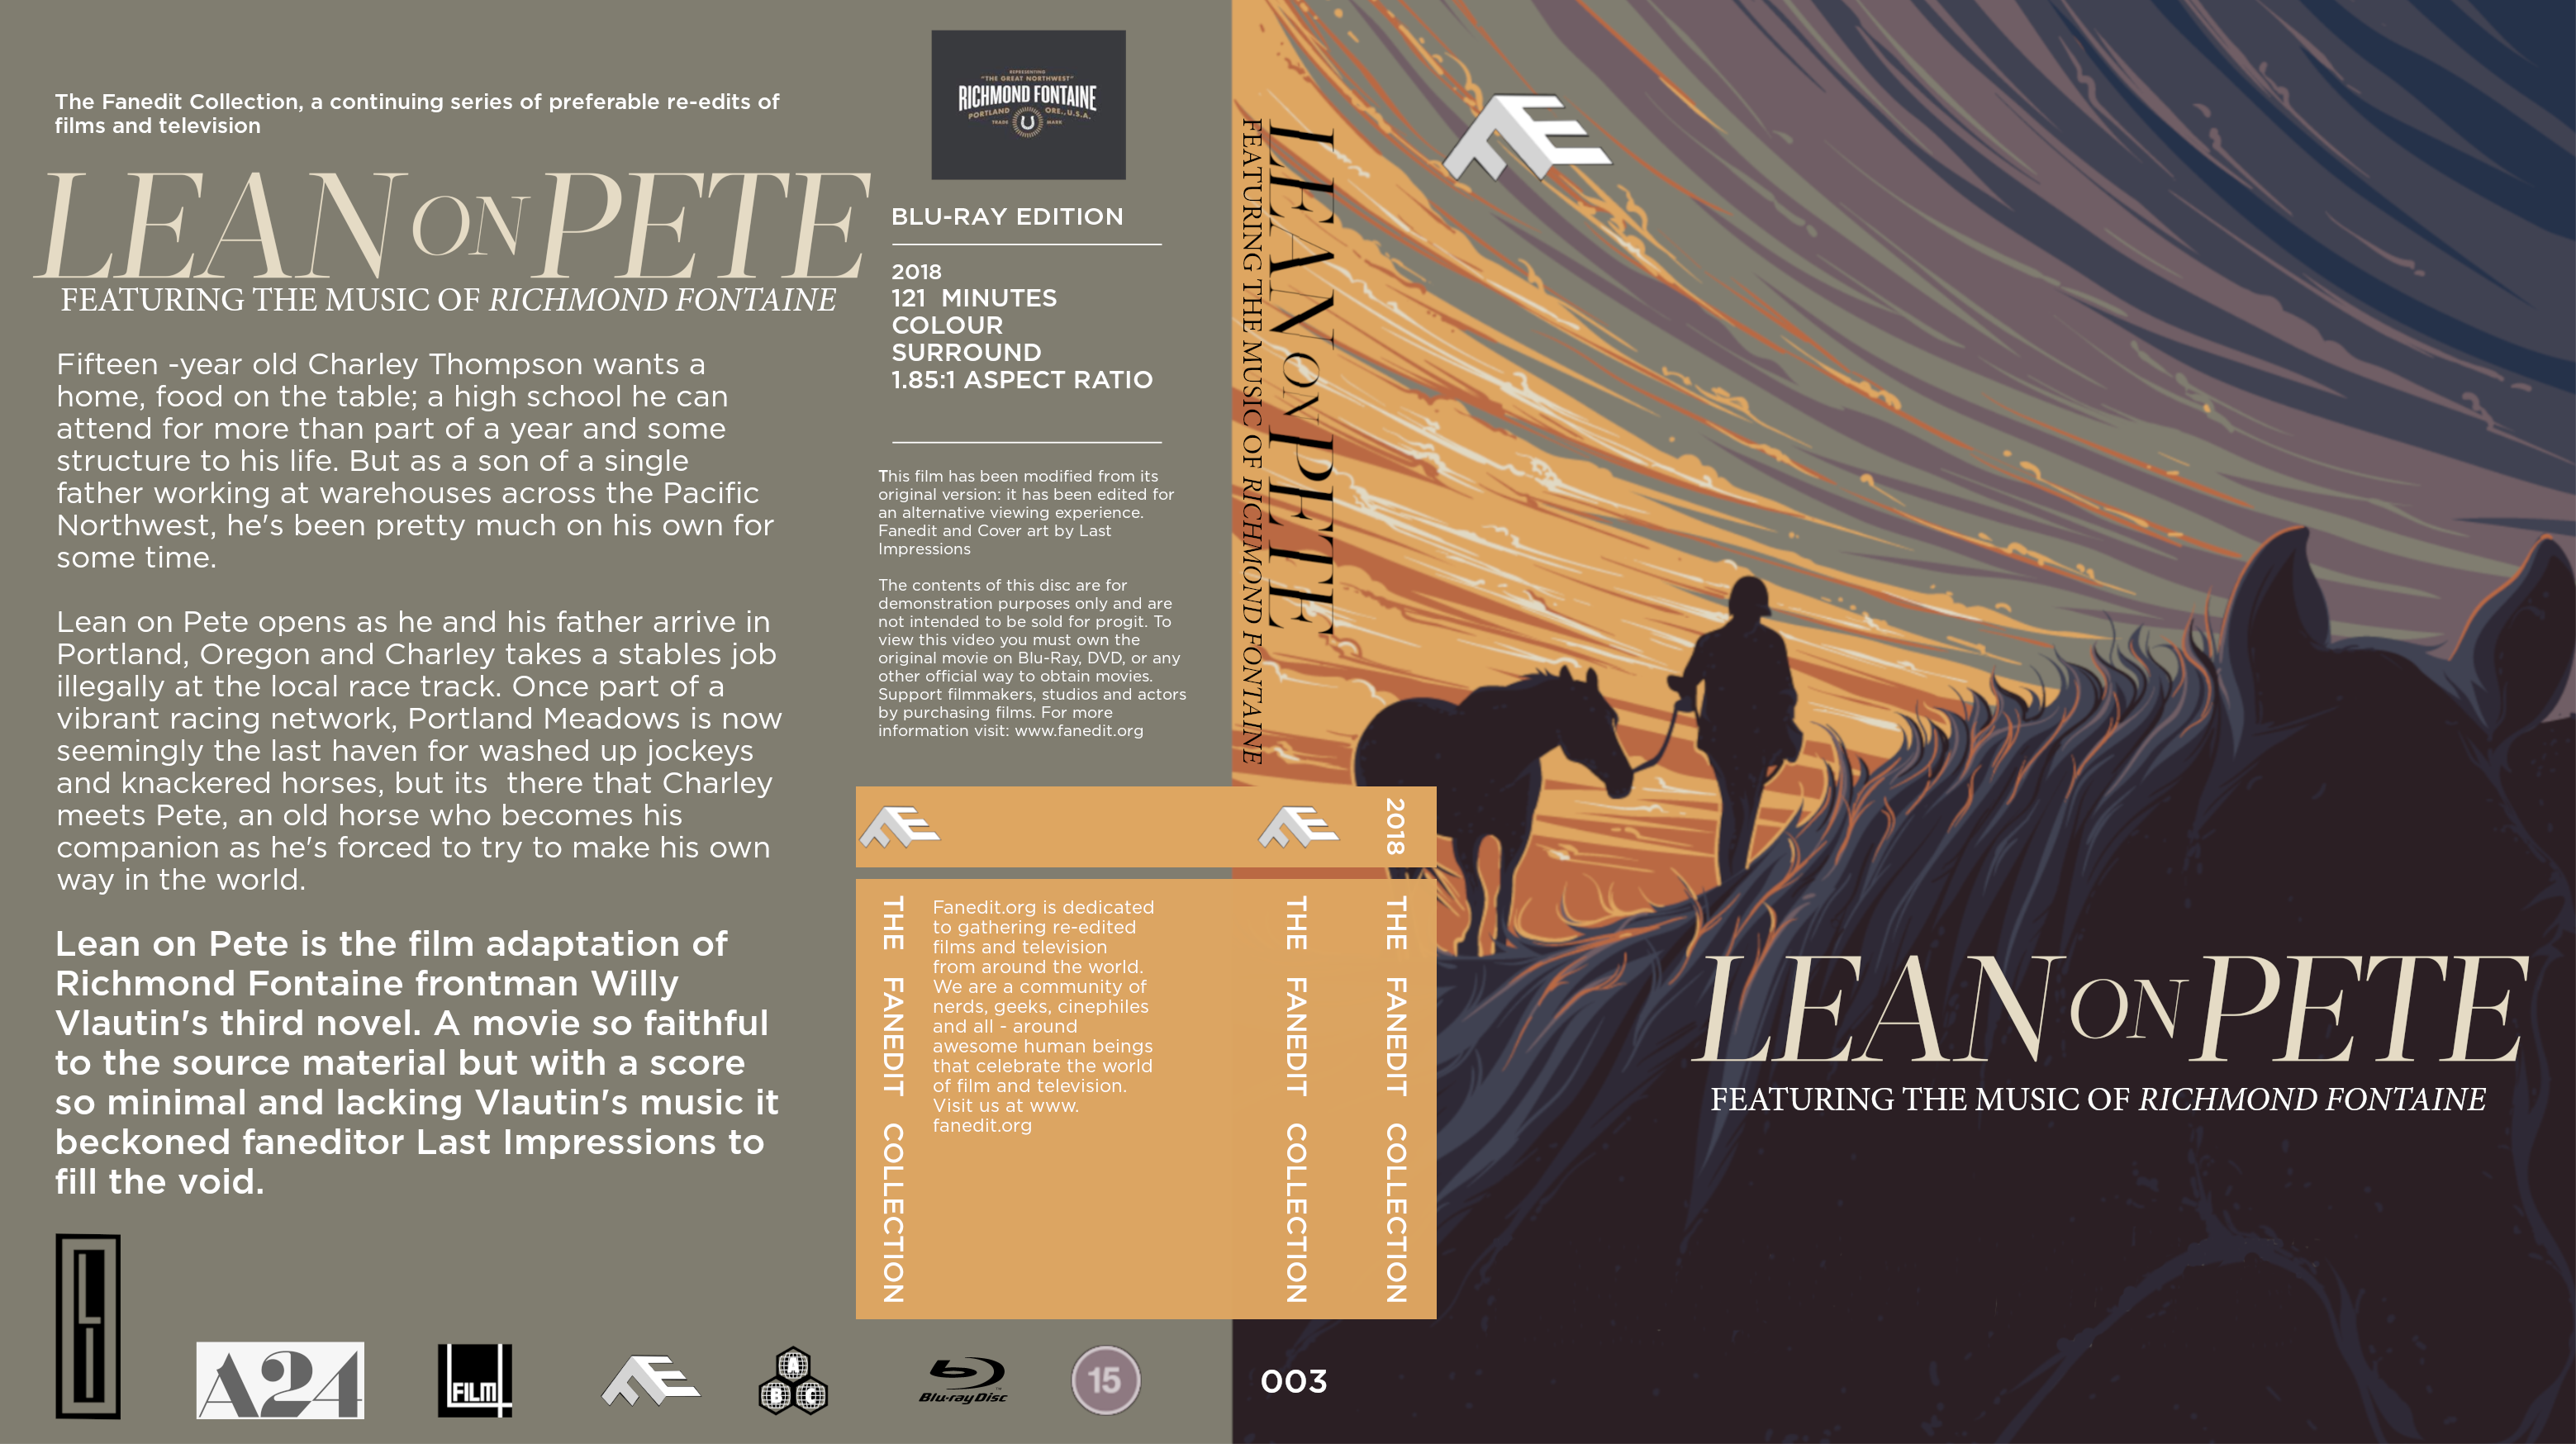 Lean on Pete Fanedit collection bluray cover 2 .png